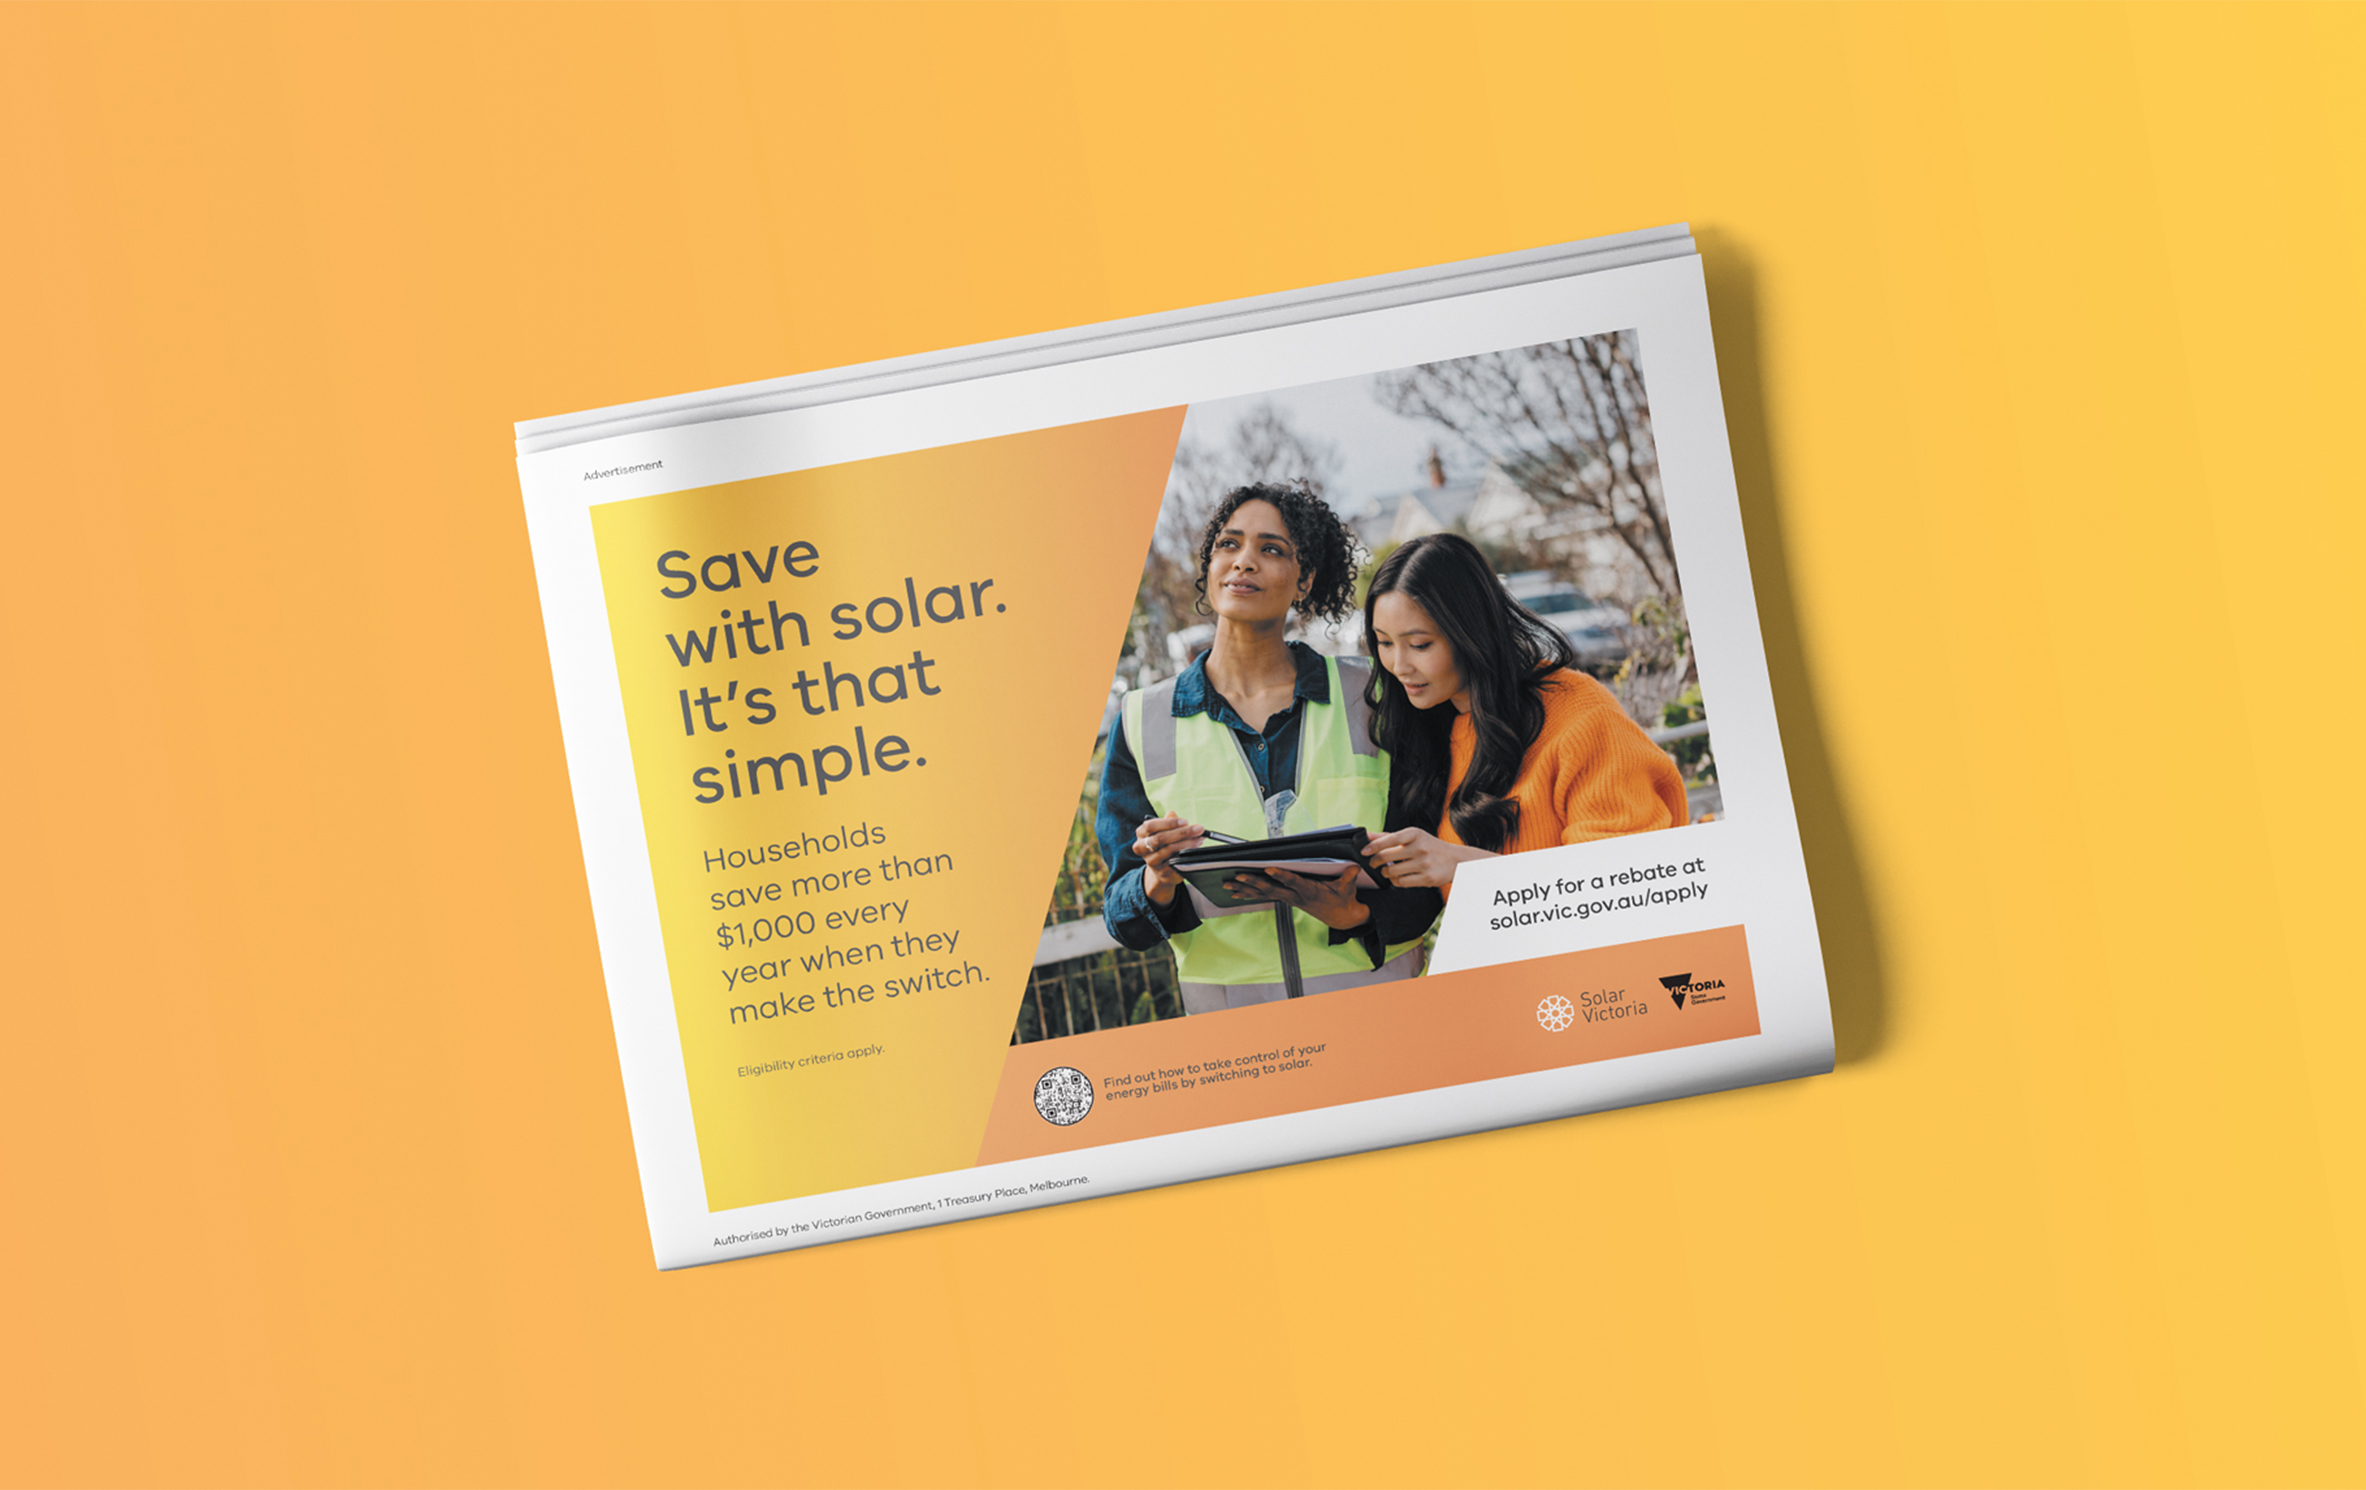 A folded newspaper, displaying a Solar Victoria advertisement. The headline reads "Save with solar. It's that simple."